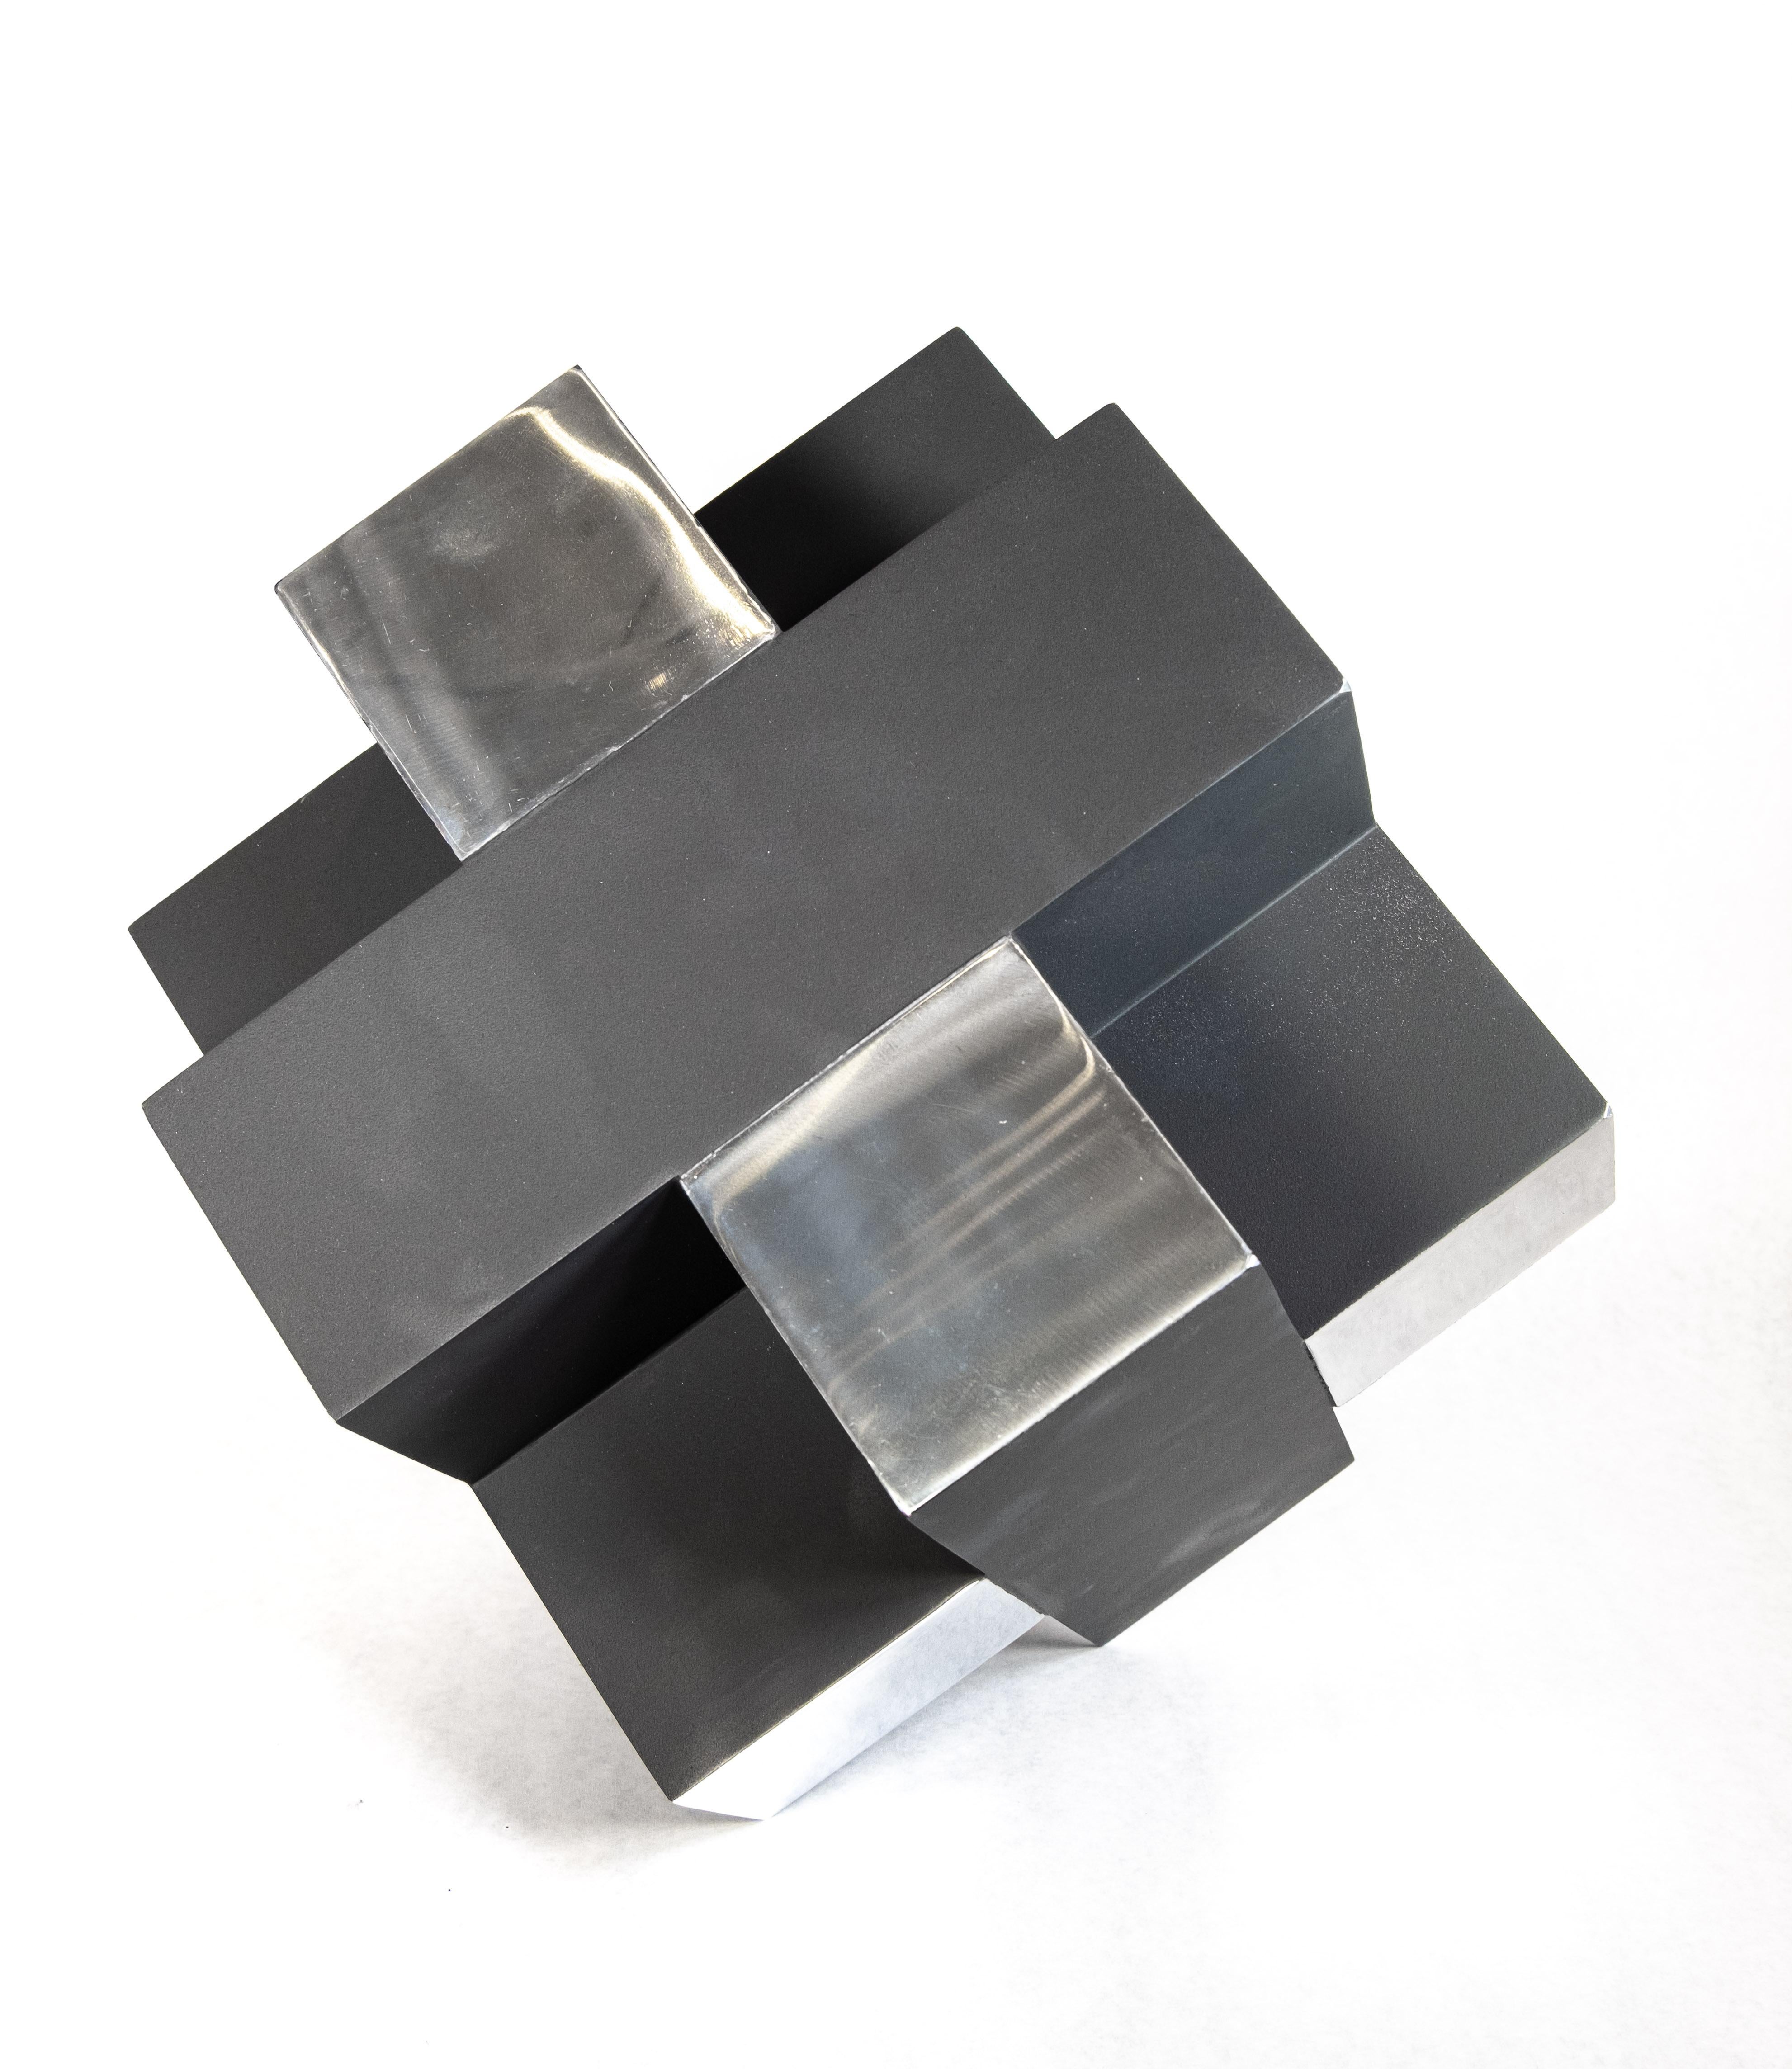 12 Inch Cube Black 1/10 - modern, intersecting geometric, aluminum sculpture - Sculpture by Philippe Pallafray